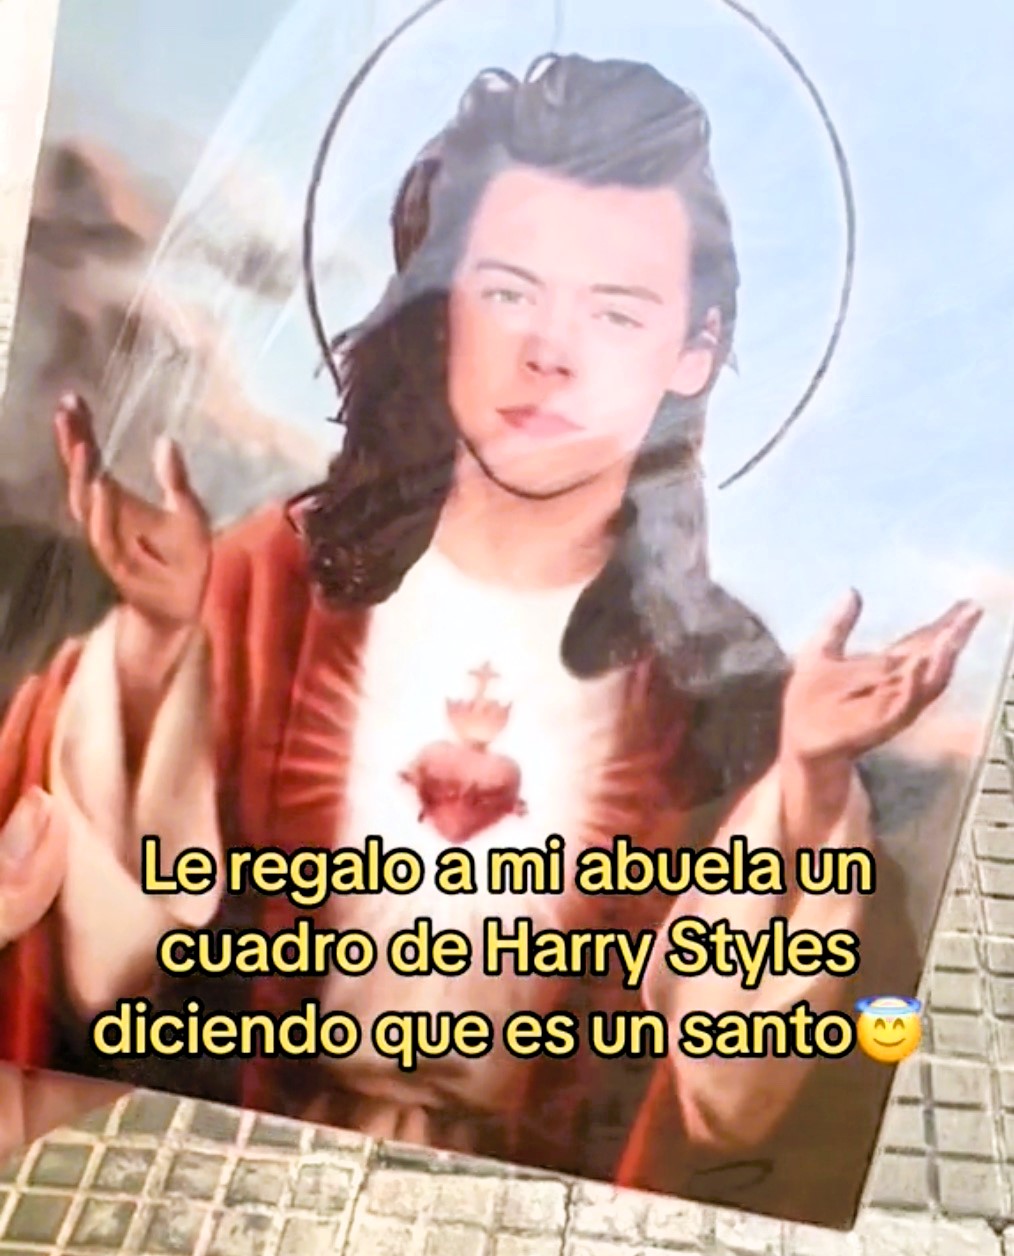 Video grab of Judit convincing her grandmother Harry Styles is a ‘religious saint’.